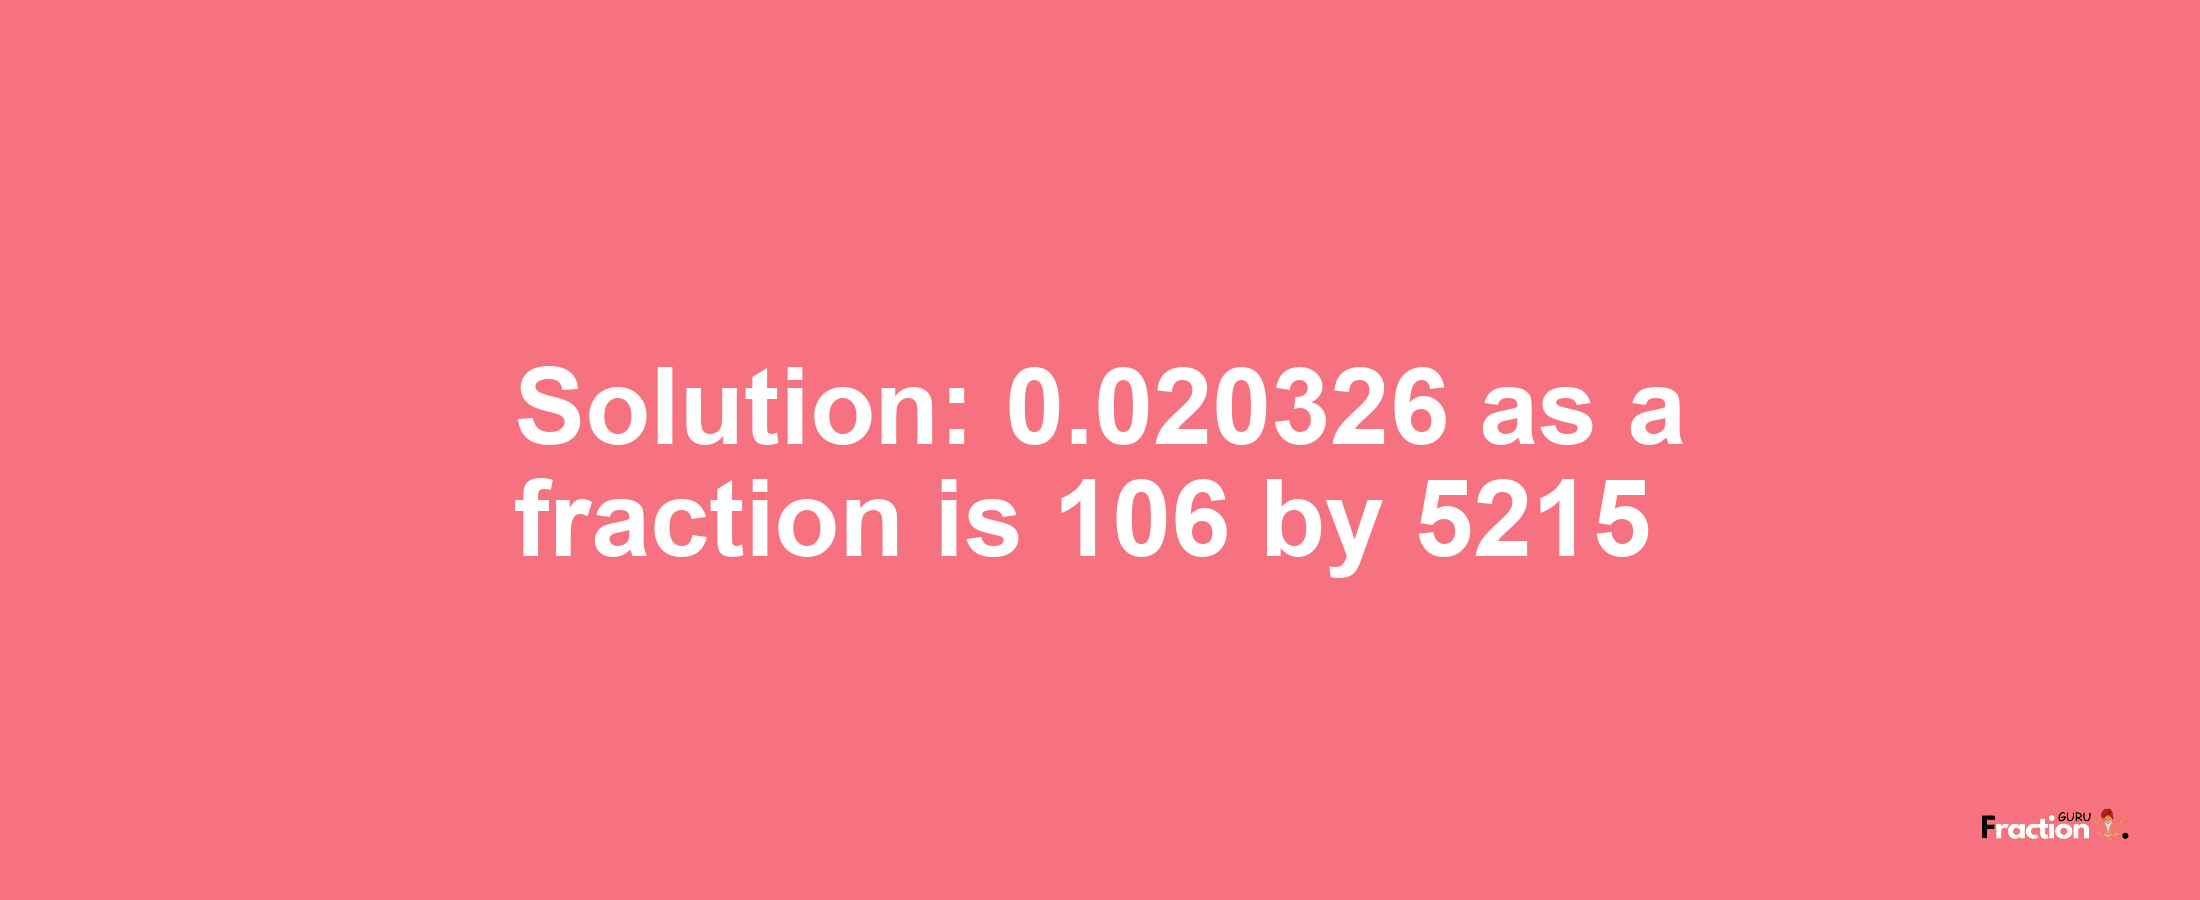 Solution:0.020326 as a fraction is 106/5215